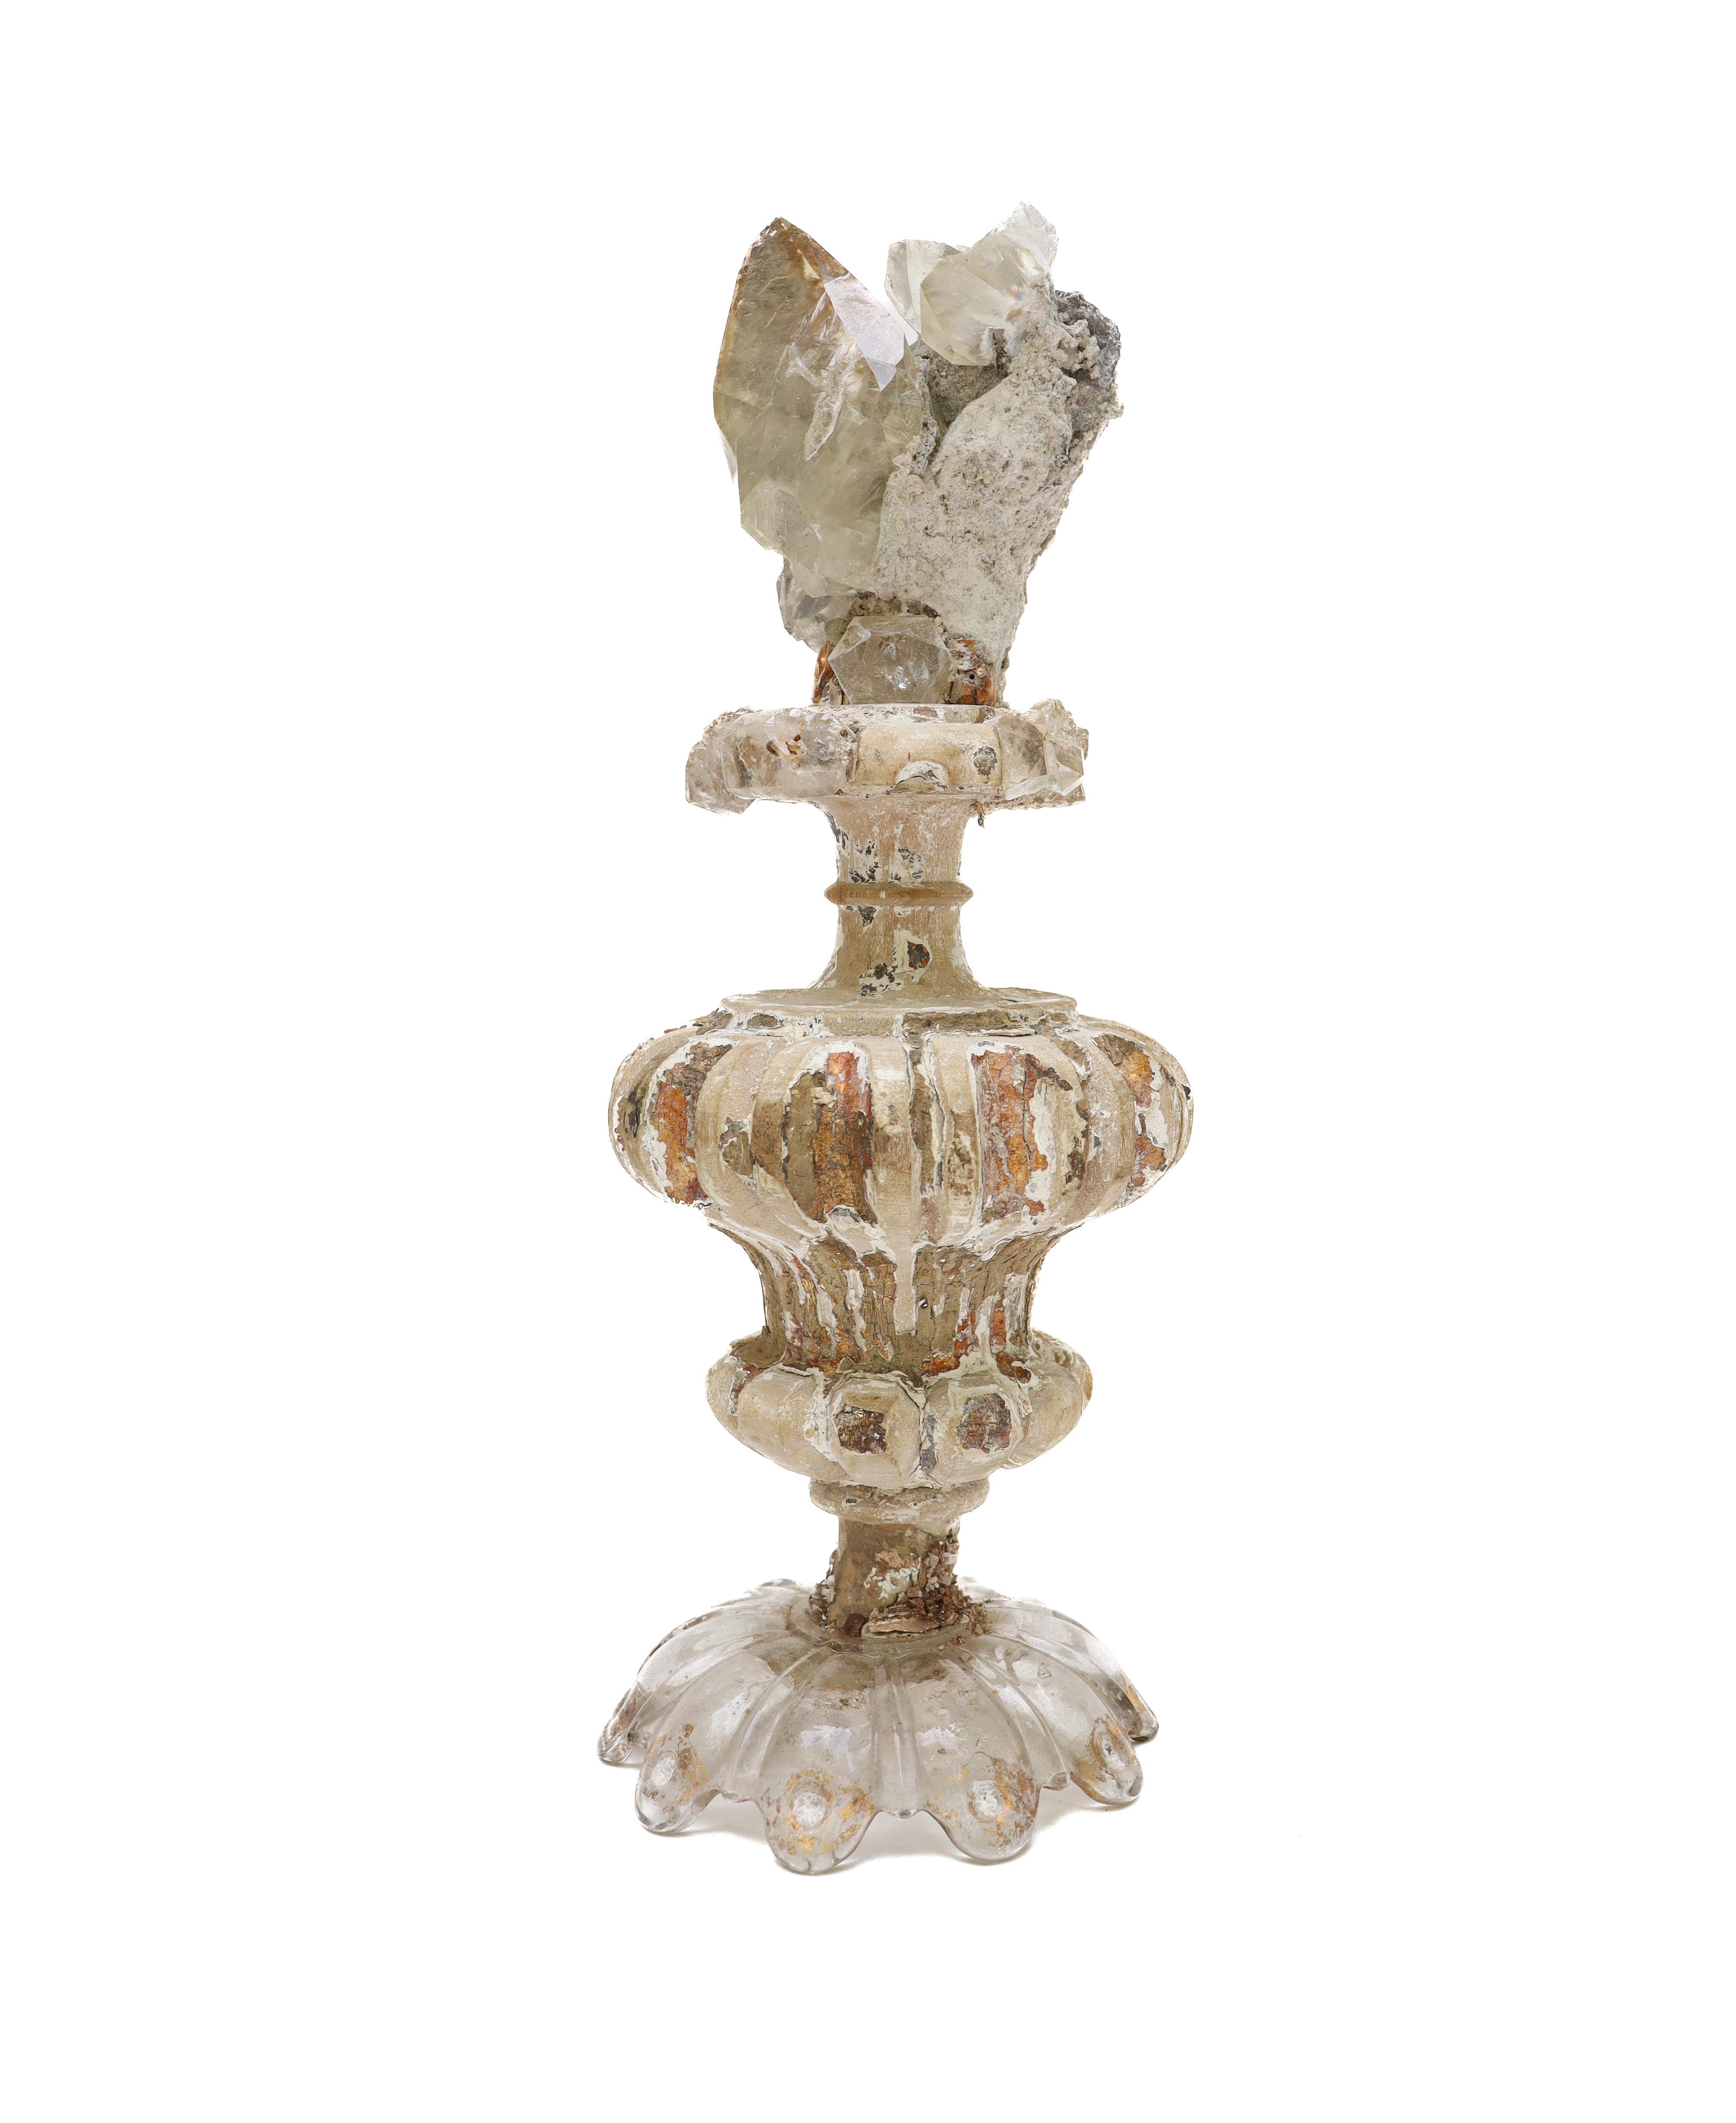 18th Century and Earlier 17th Century Italian Fragments 'Group of Three' with Calcite Crystals on Bobeche